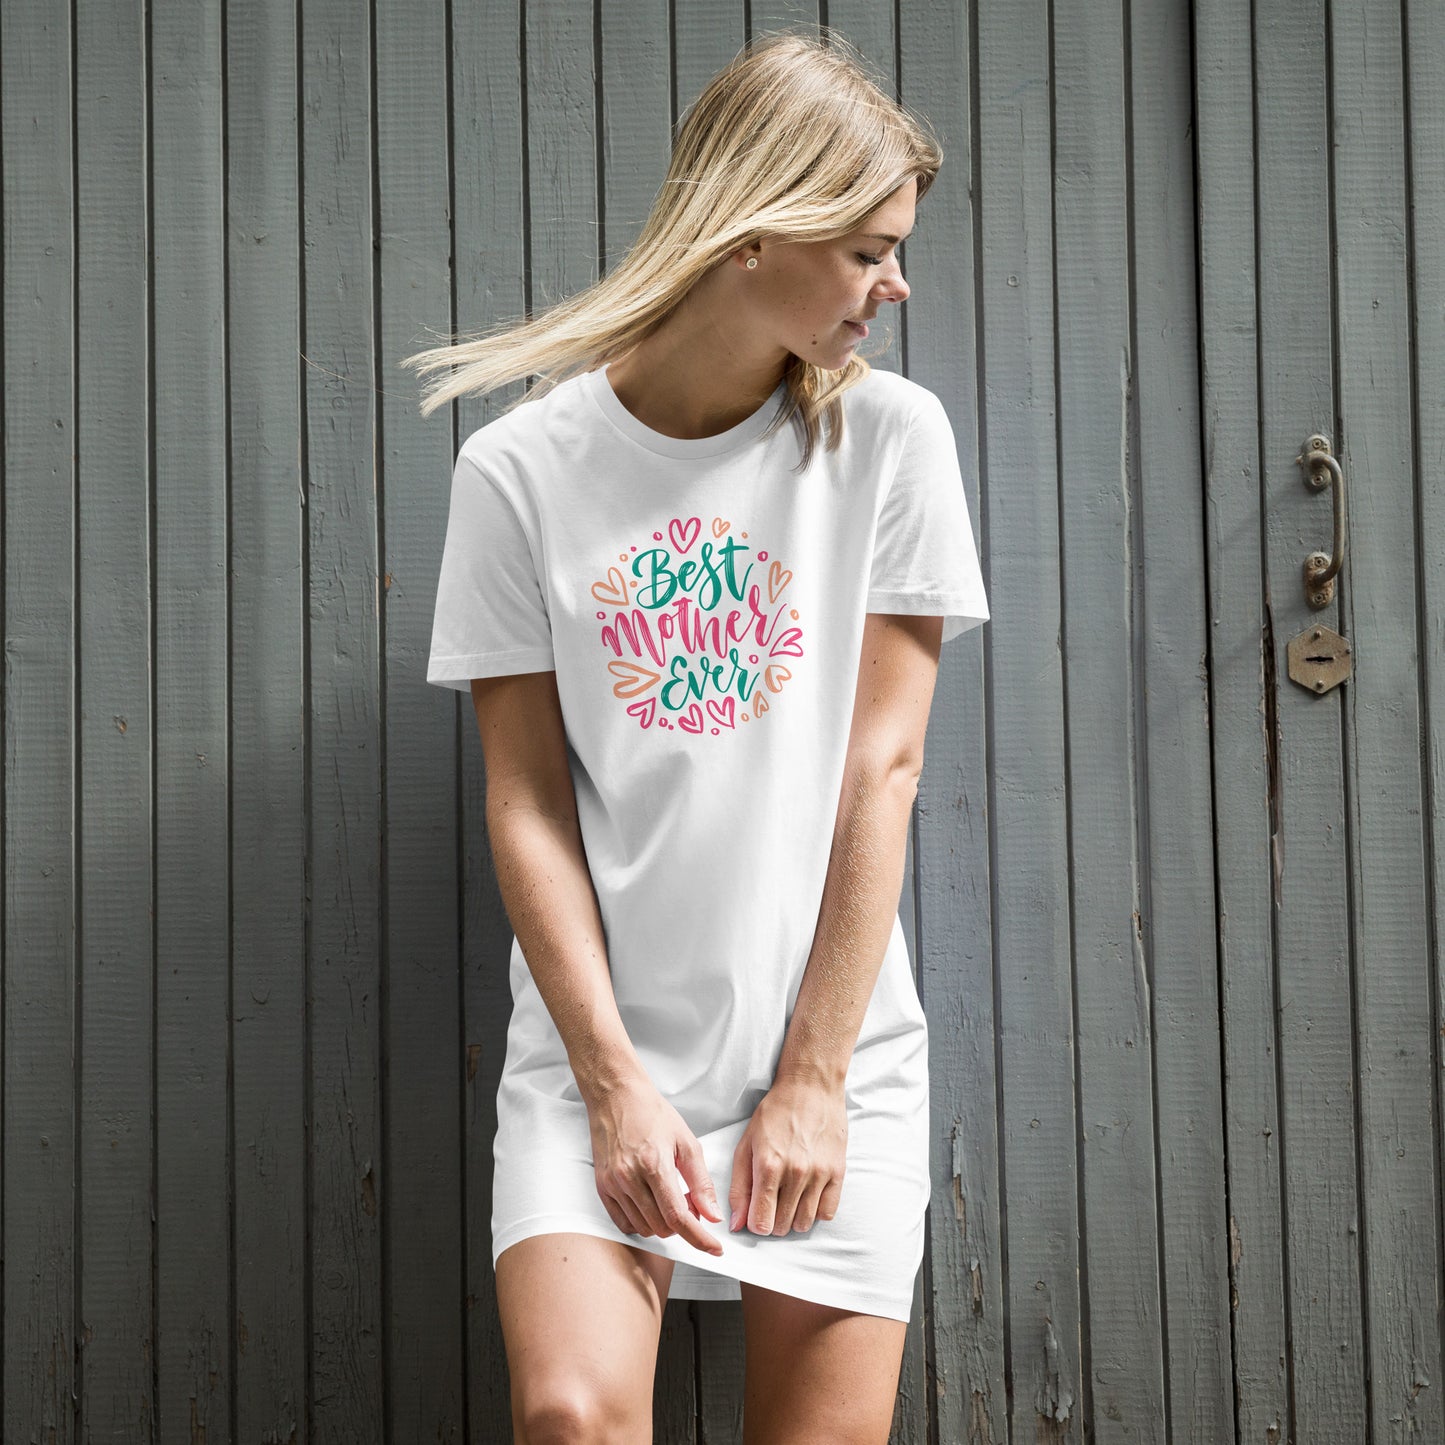 Fresh design for the best mother ever. Perfect Mothersday gift. 100% Organic cotton t-shirt dress in white with a colorful design.